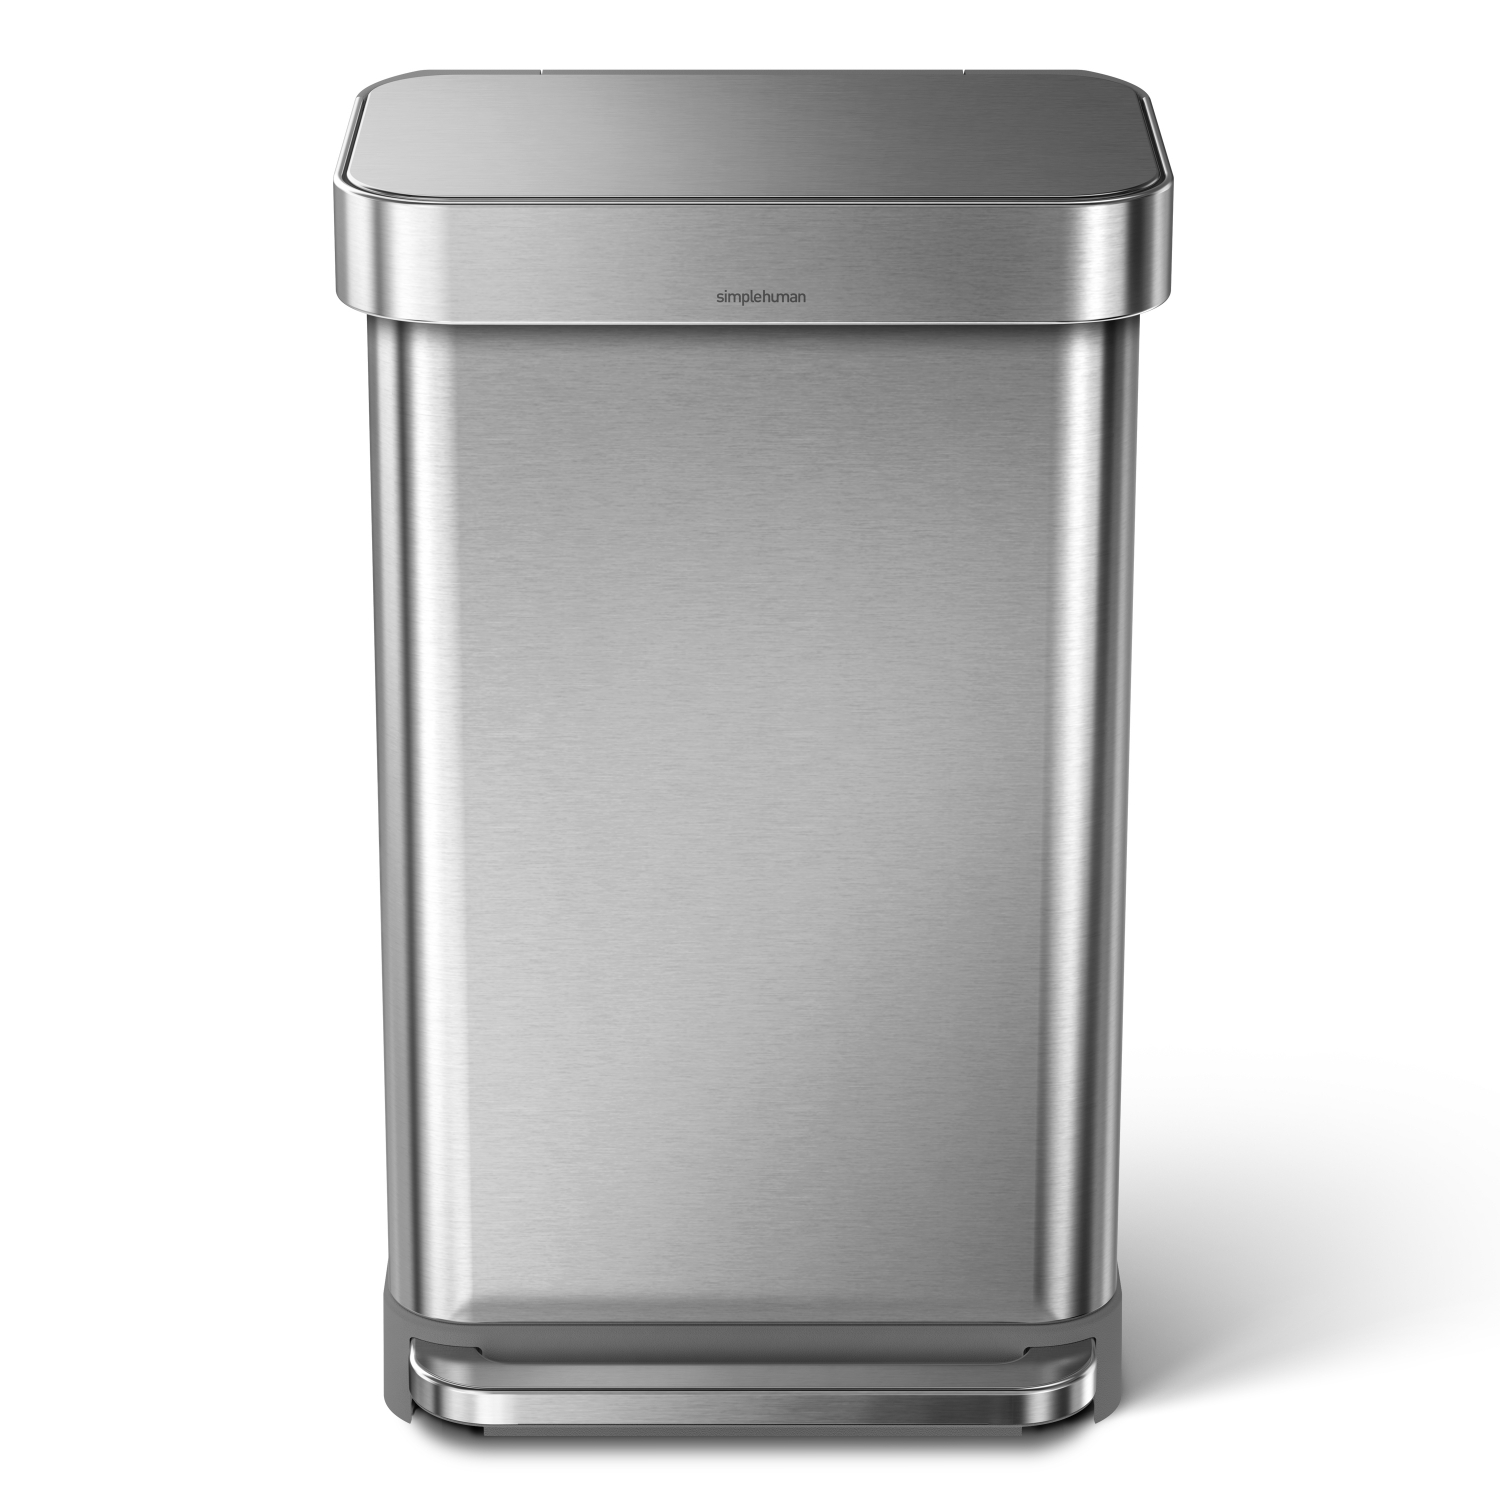 simplehuman 45 Liter 12 Gallon Rectangular Kitchen Step Trash Can with Soft-Close Lid White Plastic 